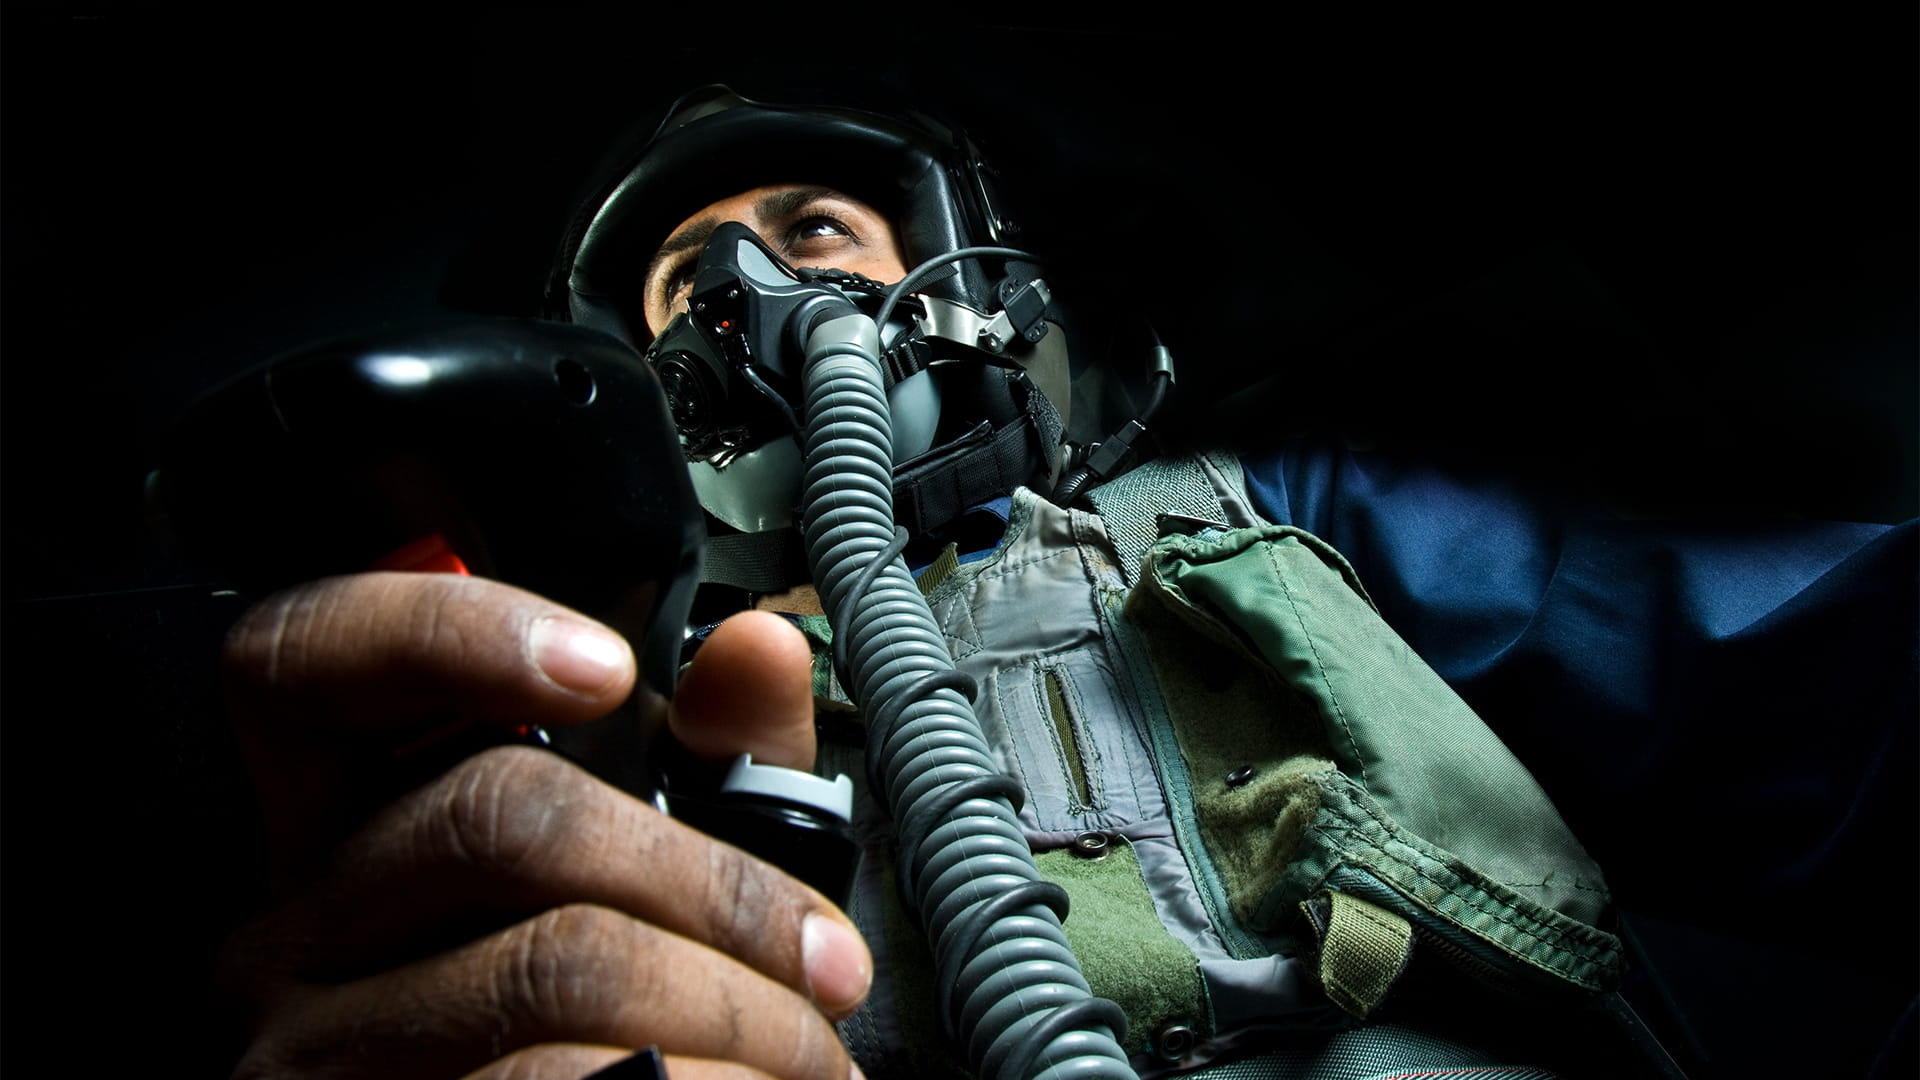 Pilot with oxygen mask